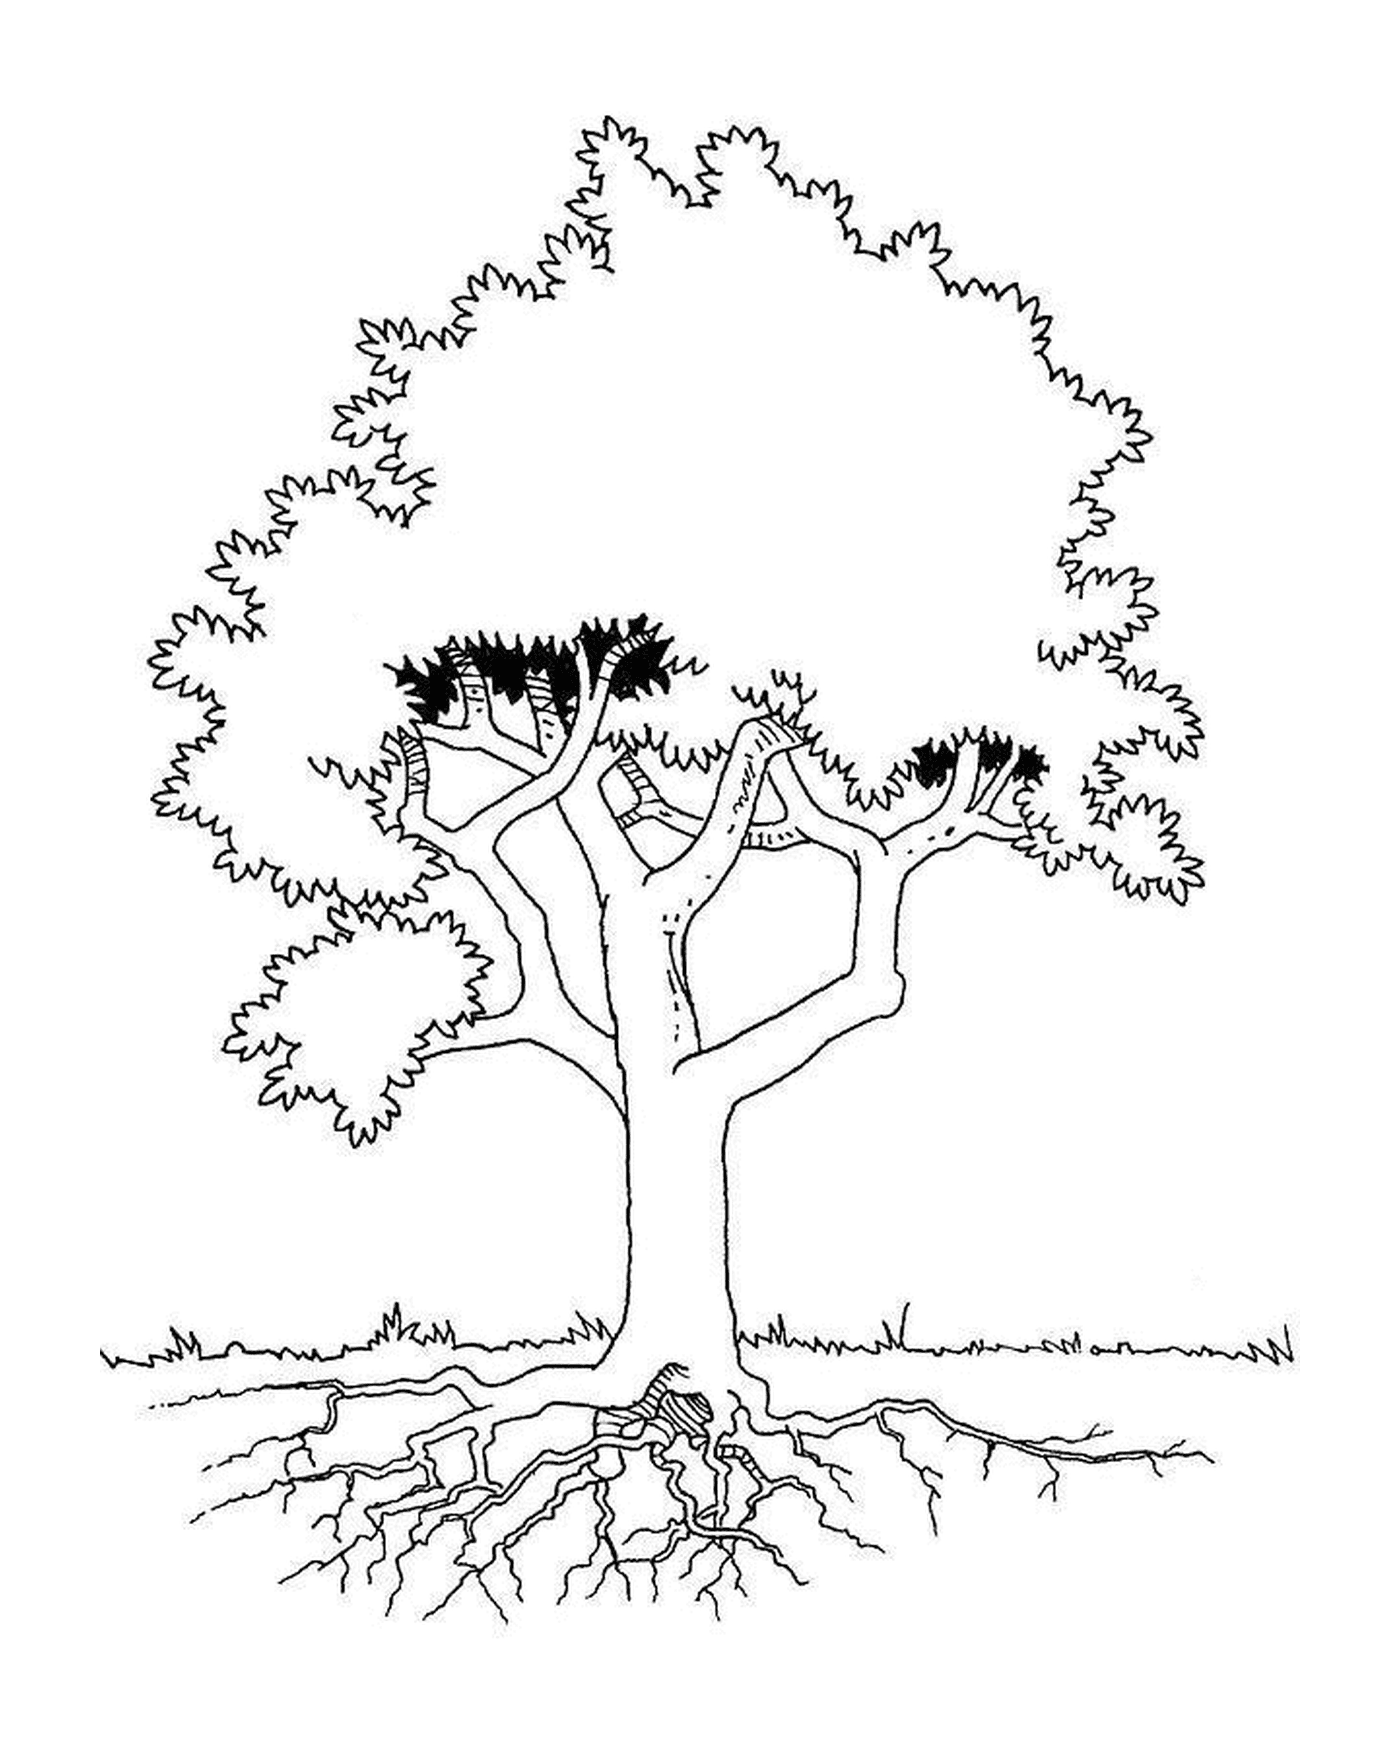  A tree with roots 